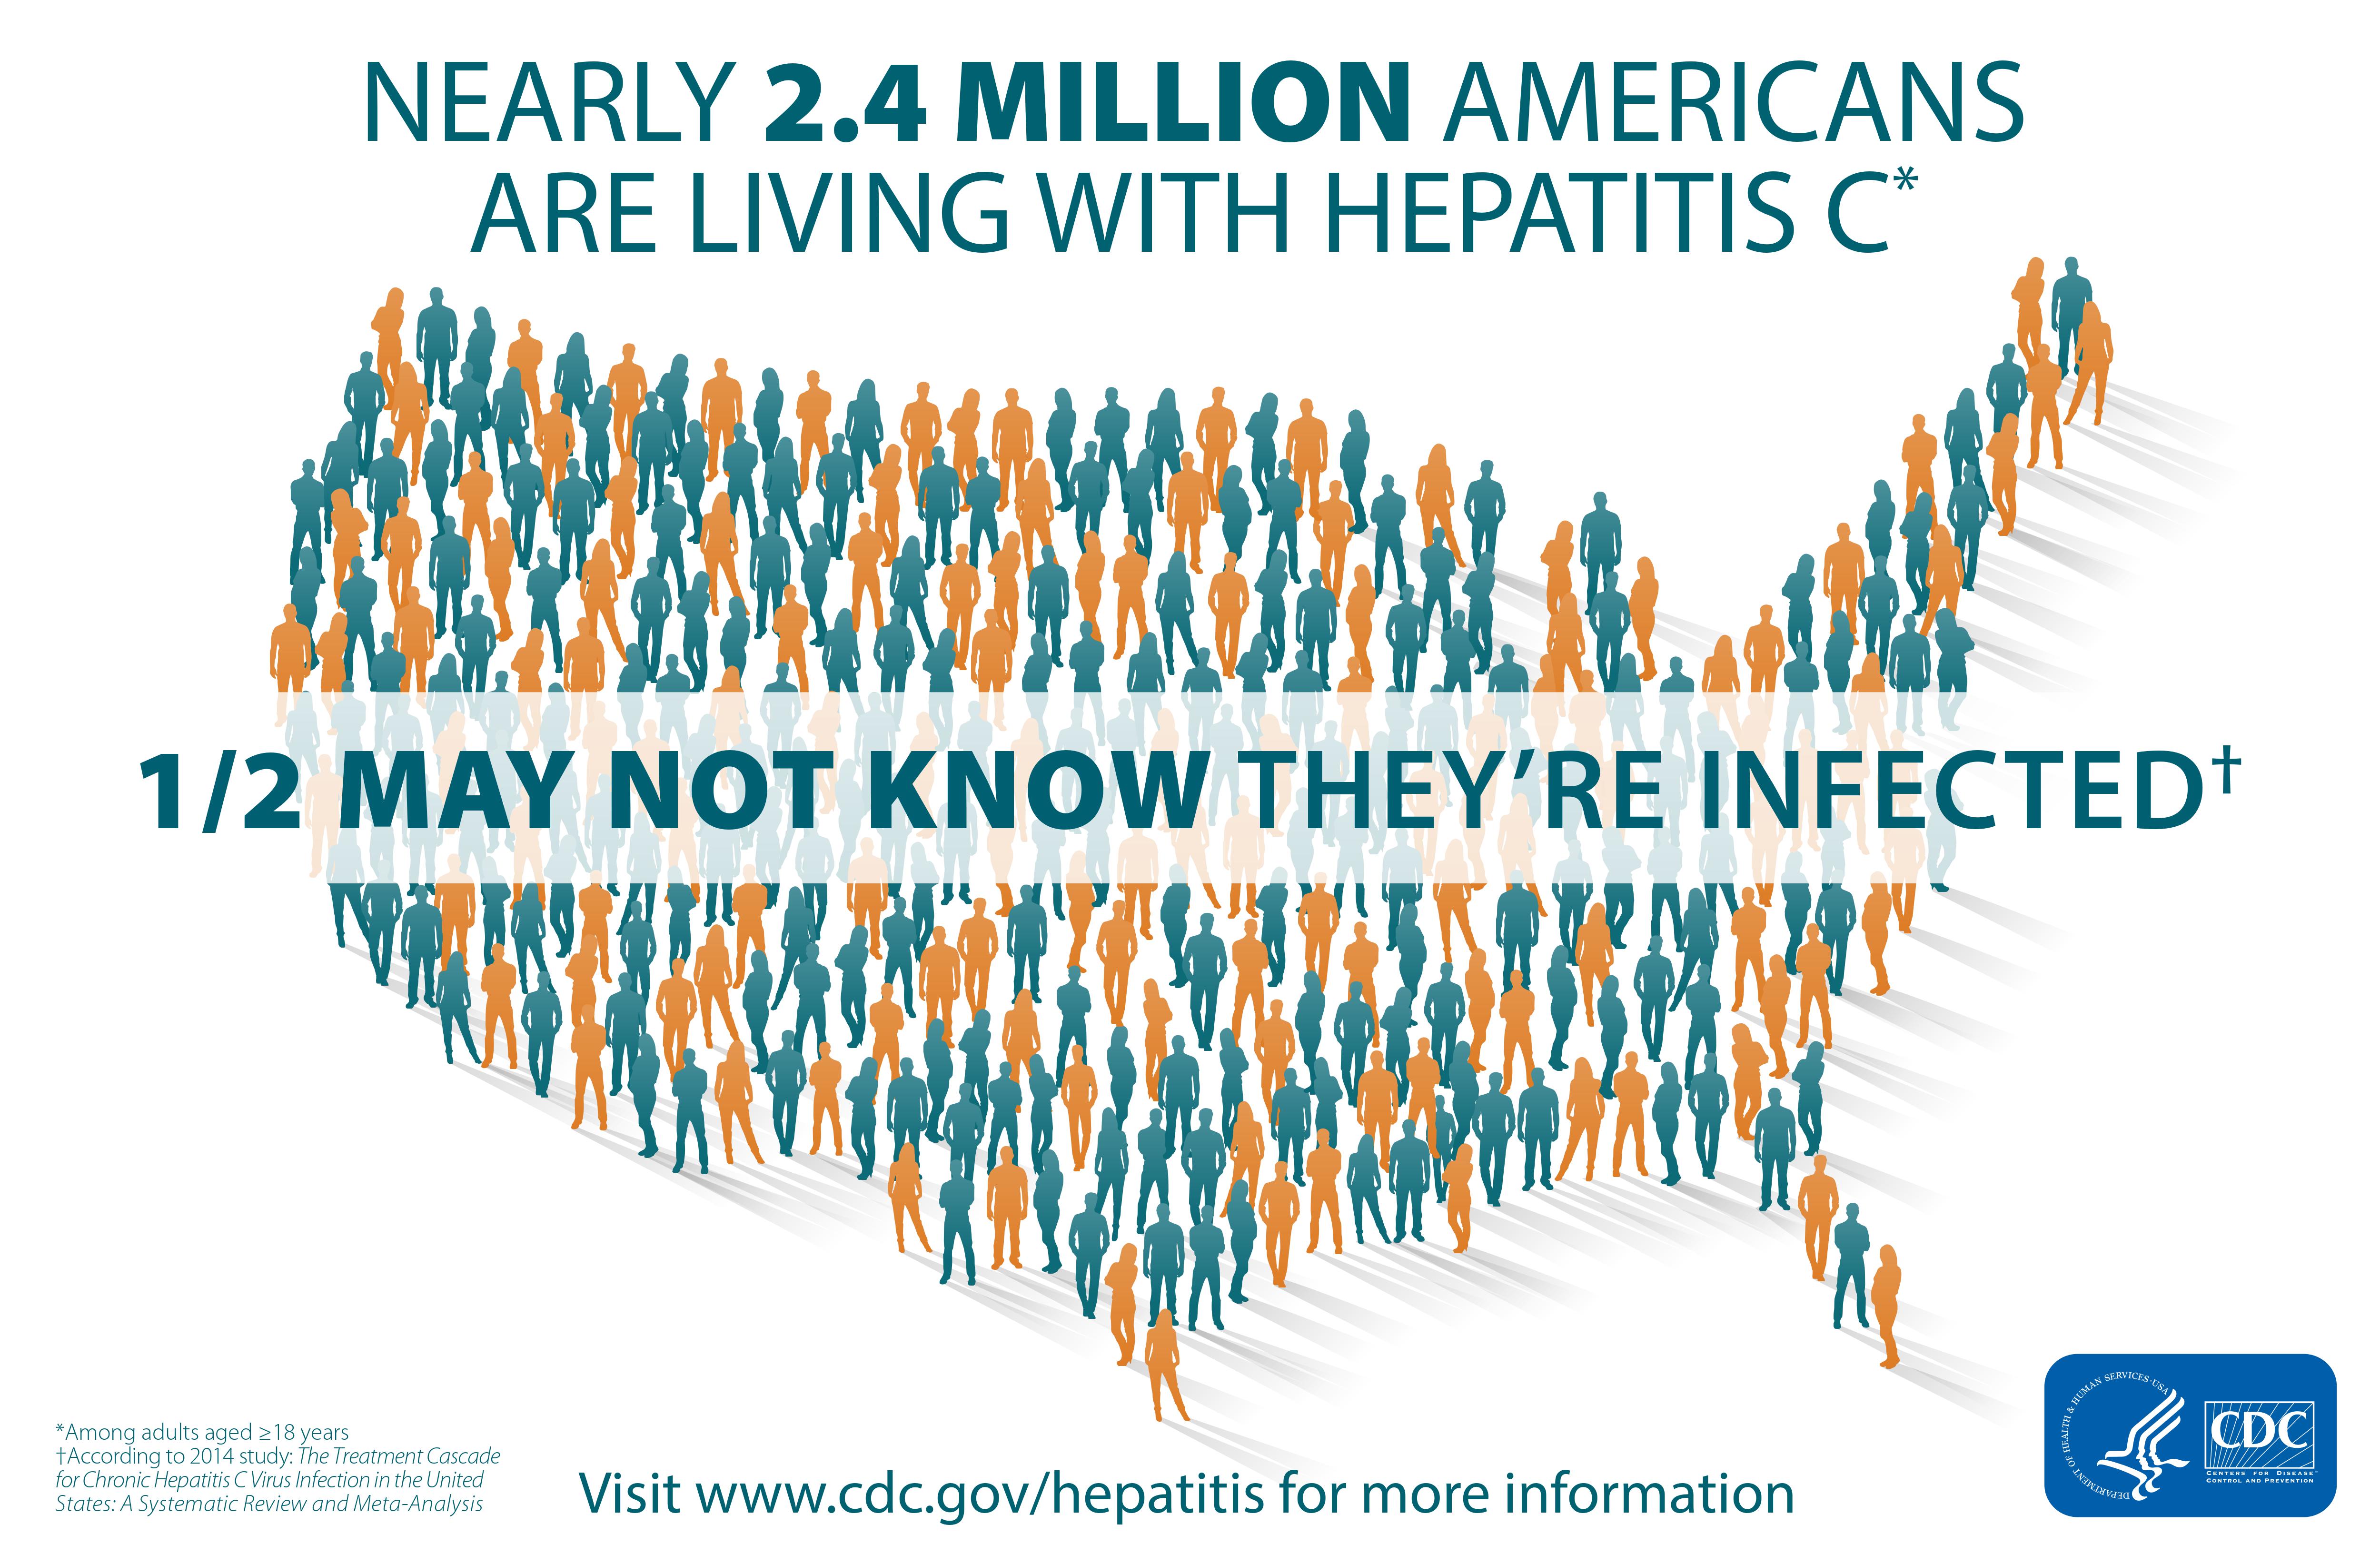 Nearly 2.4 million Americans are living with hepatitis C